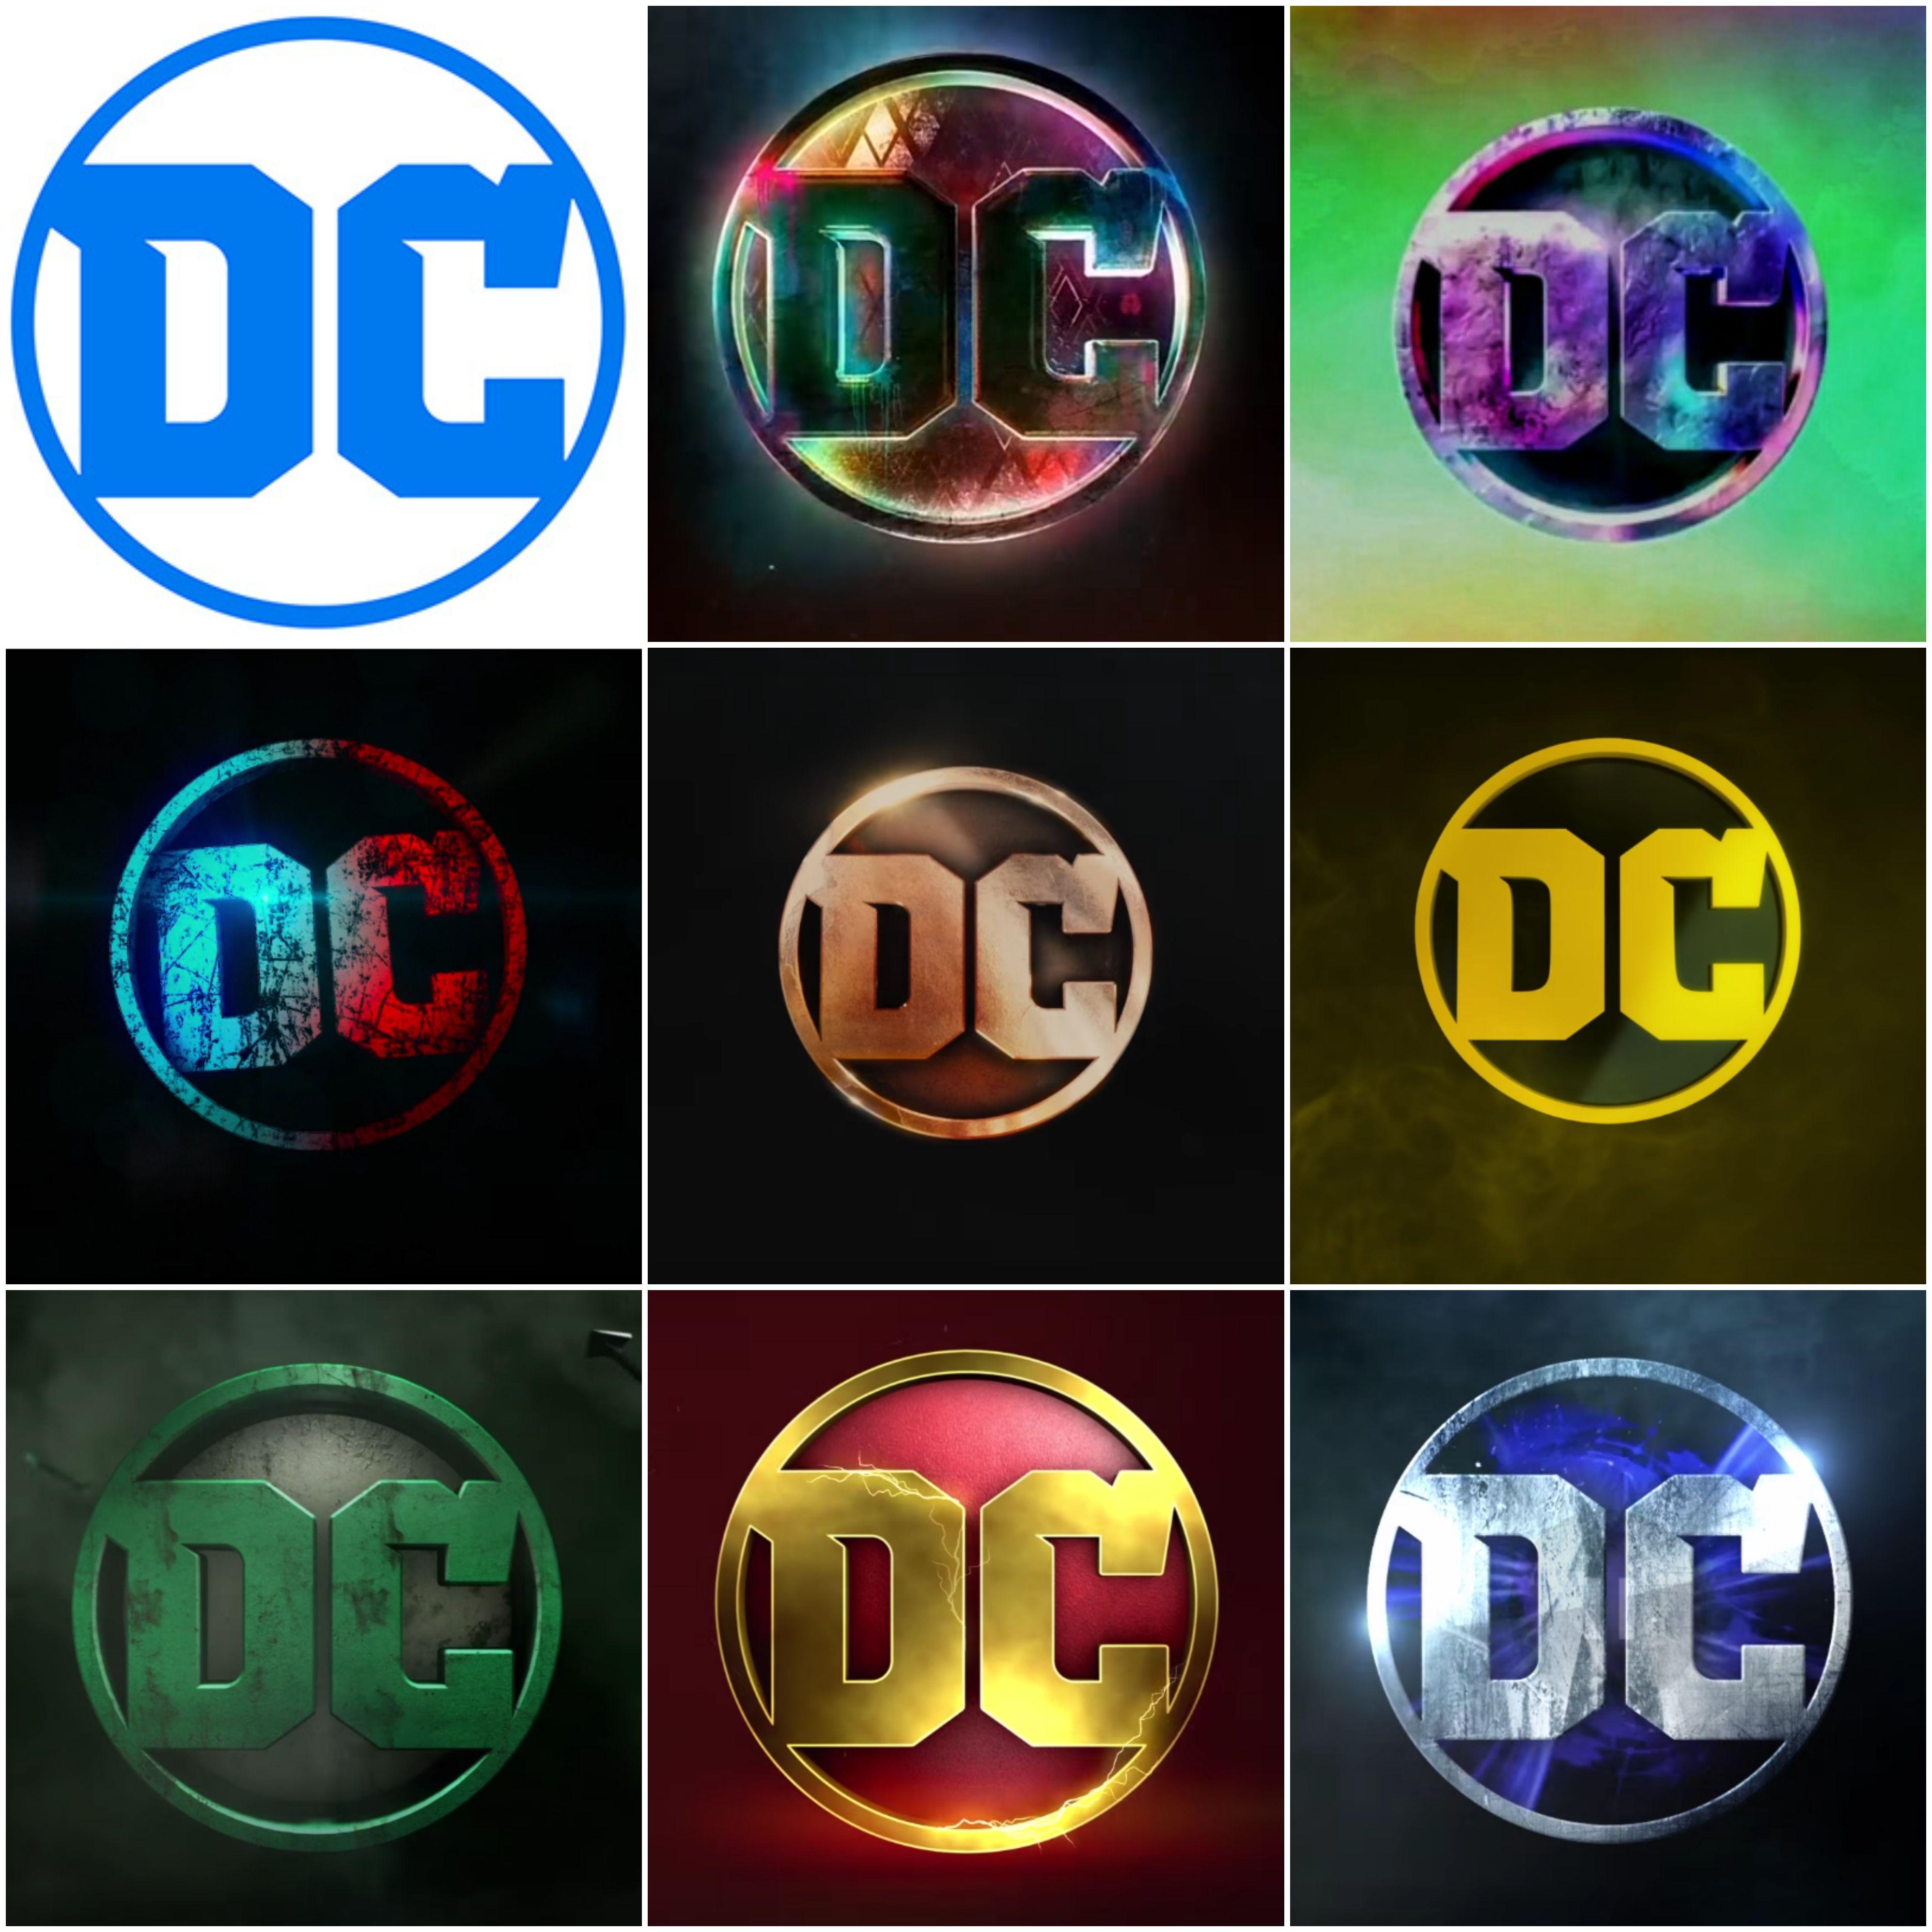 New DC Logo - Gotta love the things they can do with the new DC logo. : DCcomics